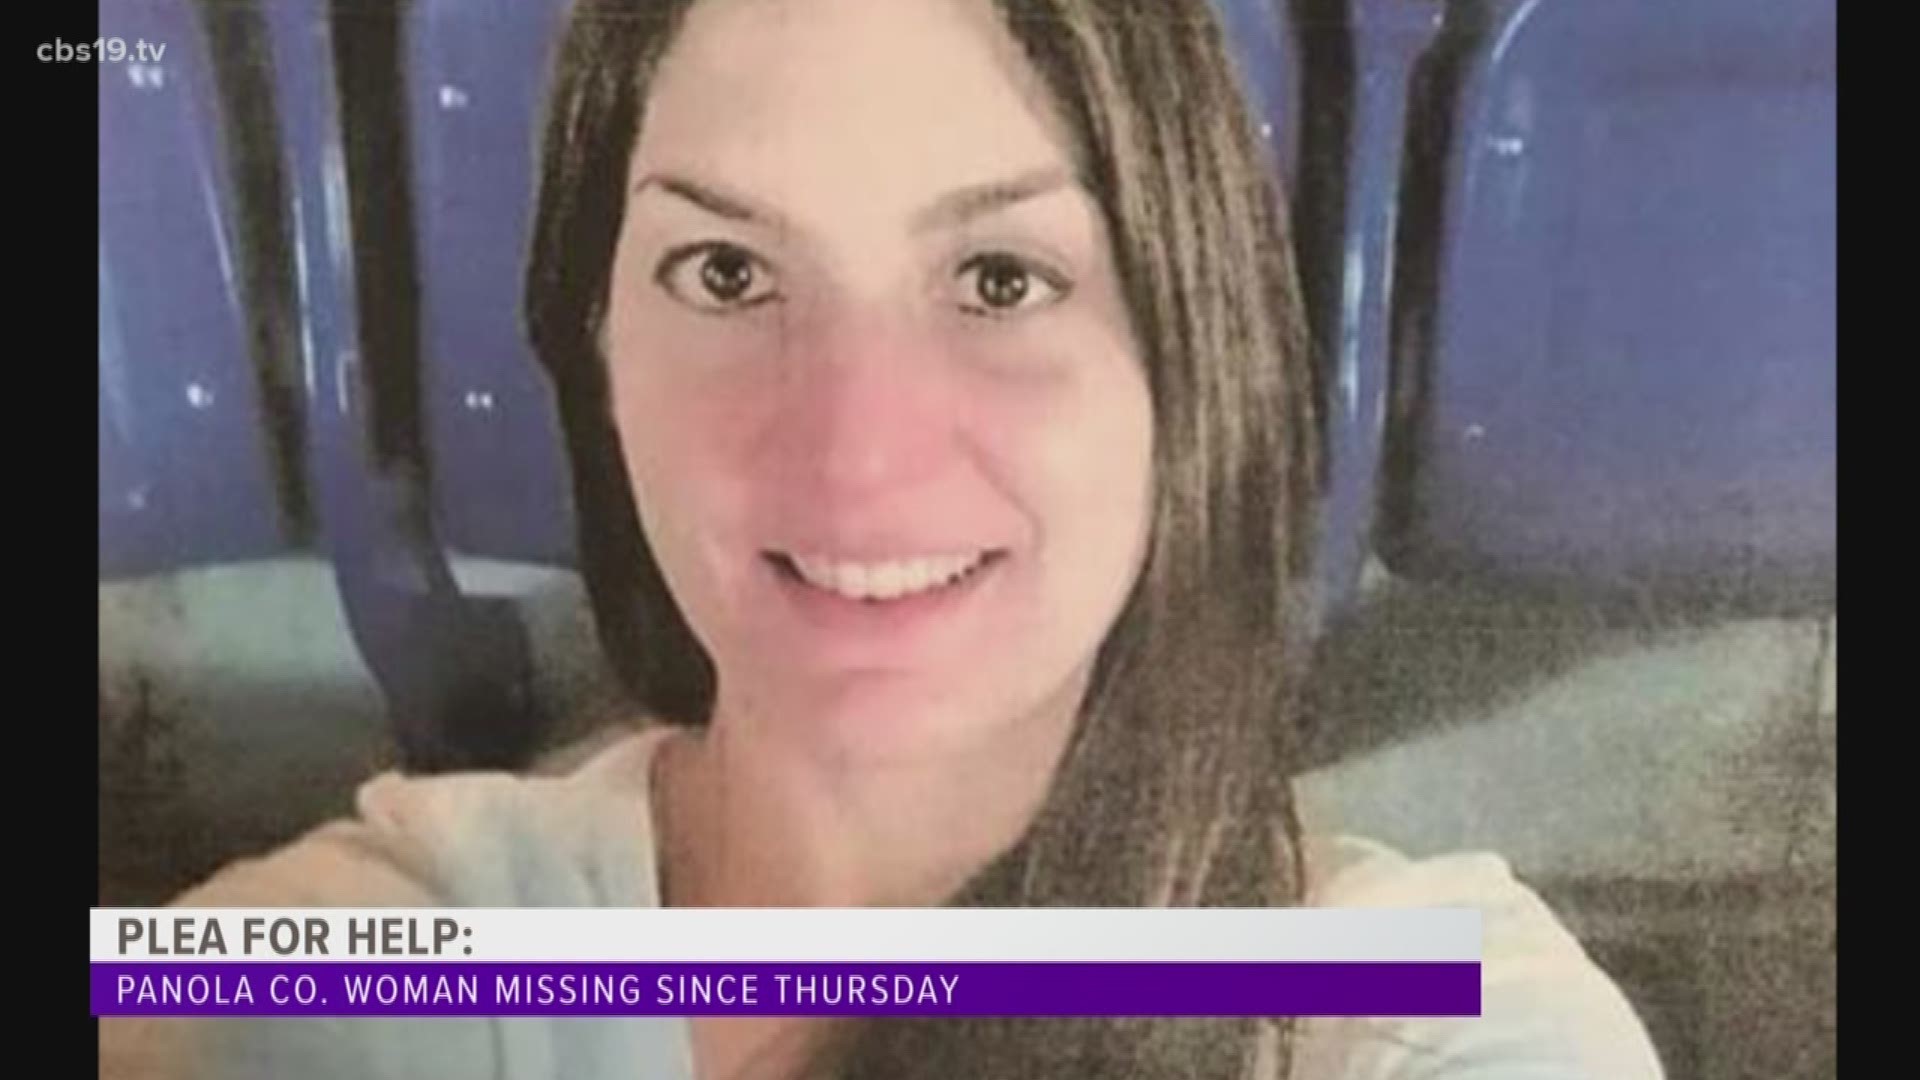 A woman in Panola Co. is missing since last Thursday. Two of her friends are doing all they can to spread the word.